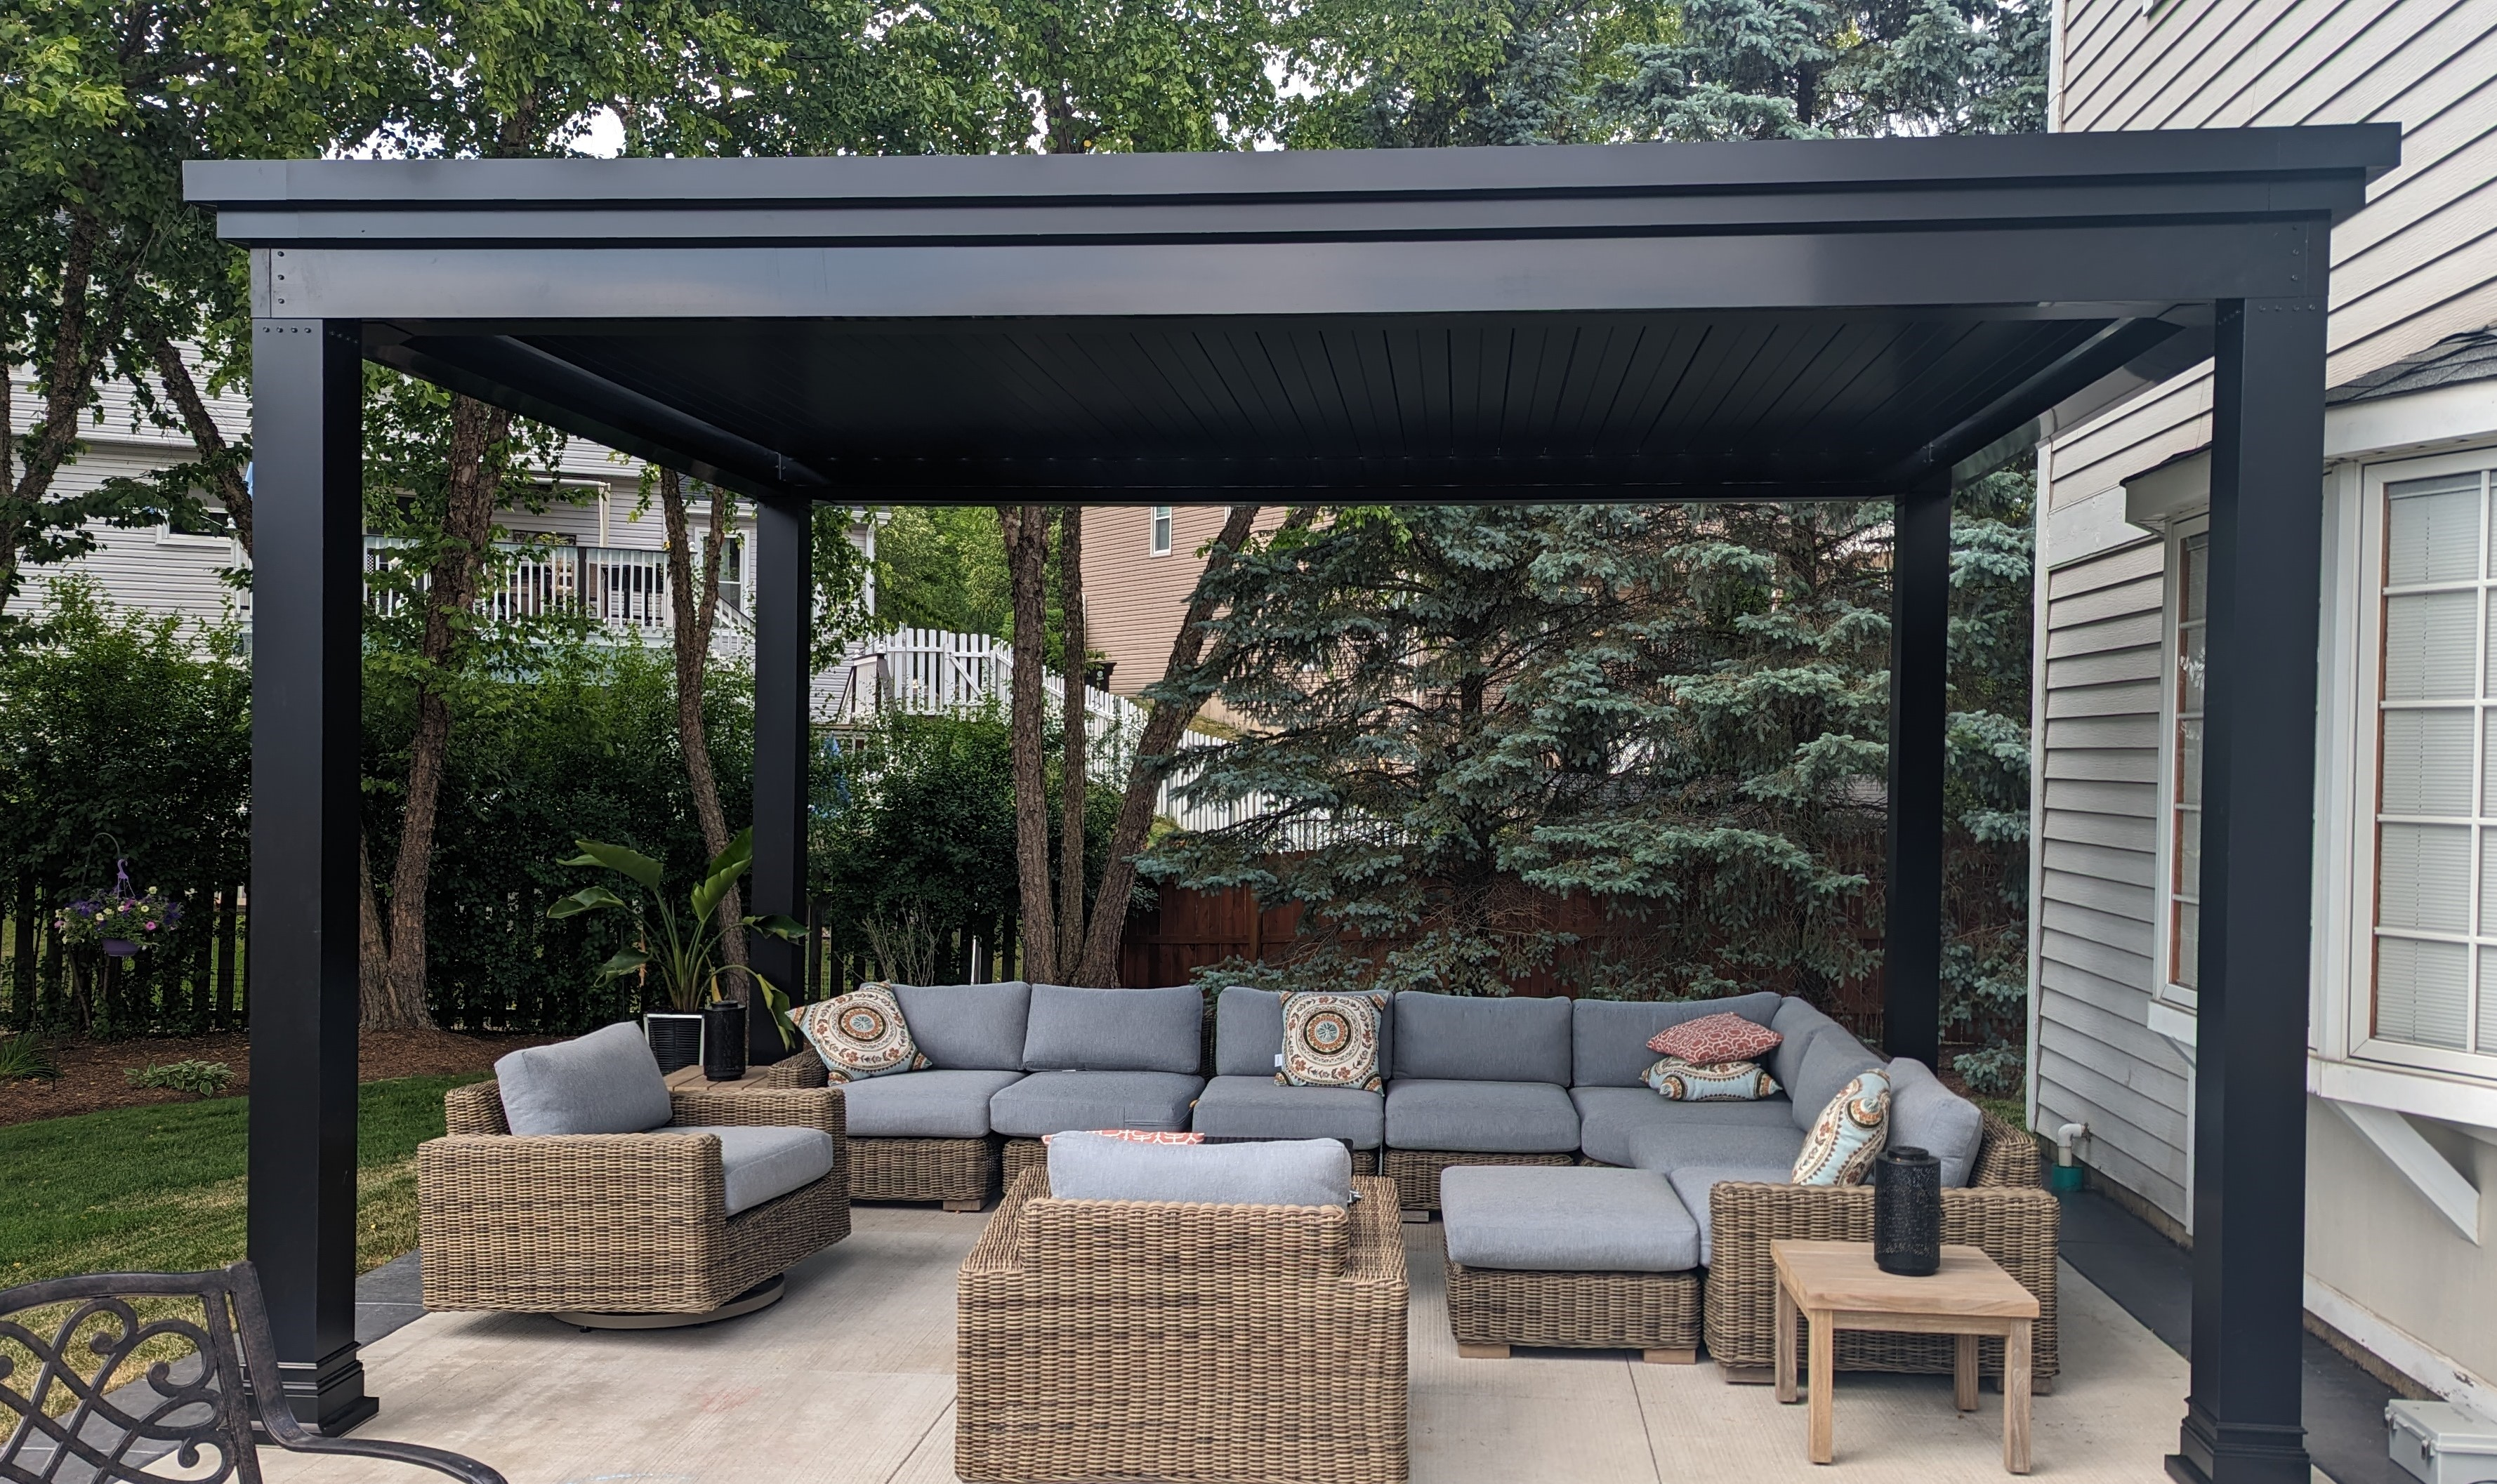 Natural feel with trees and grass surrounding this outdoor living room and low maintenance space